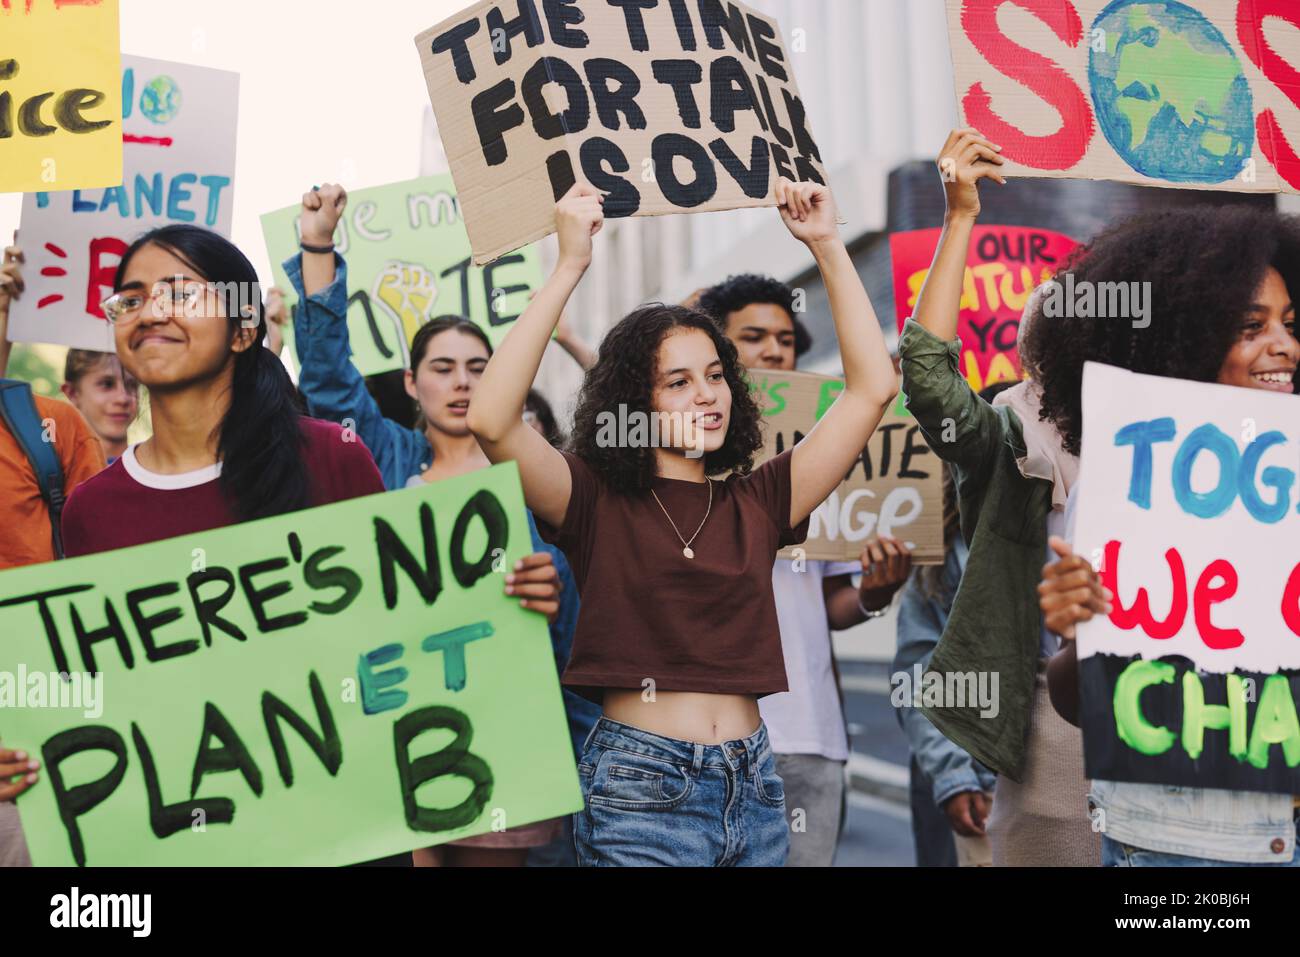 Generation Z youngsters marching against climate change and global warming. Multicultural climate activists protesting with posters and banners. Group Stock Photo